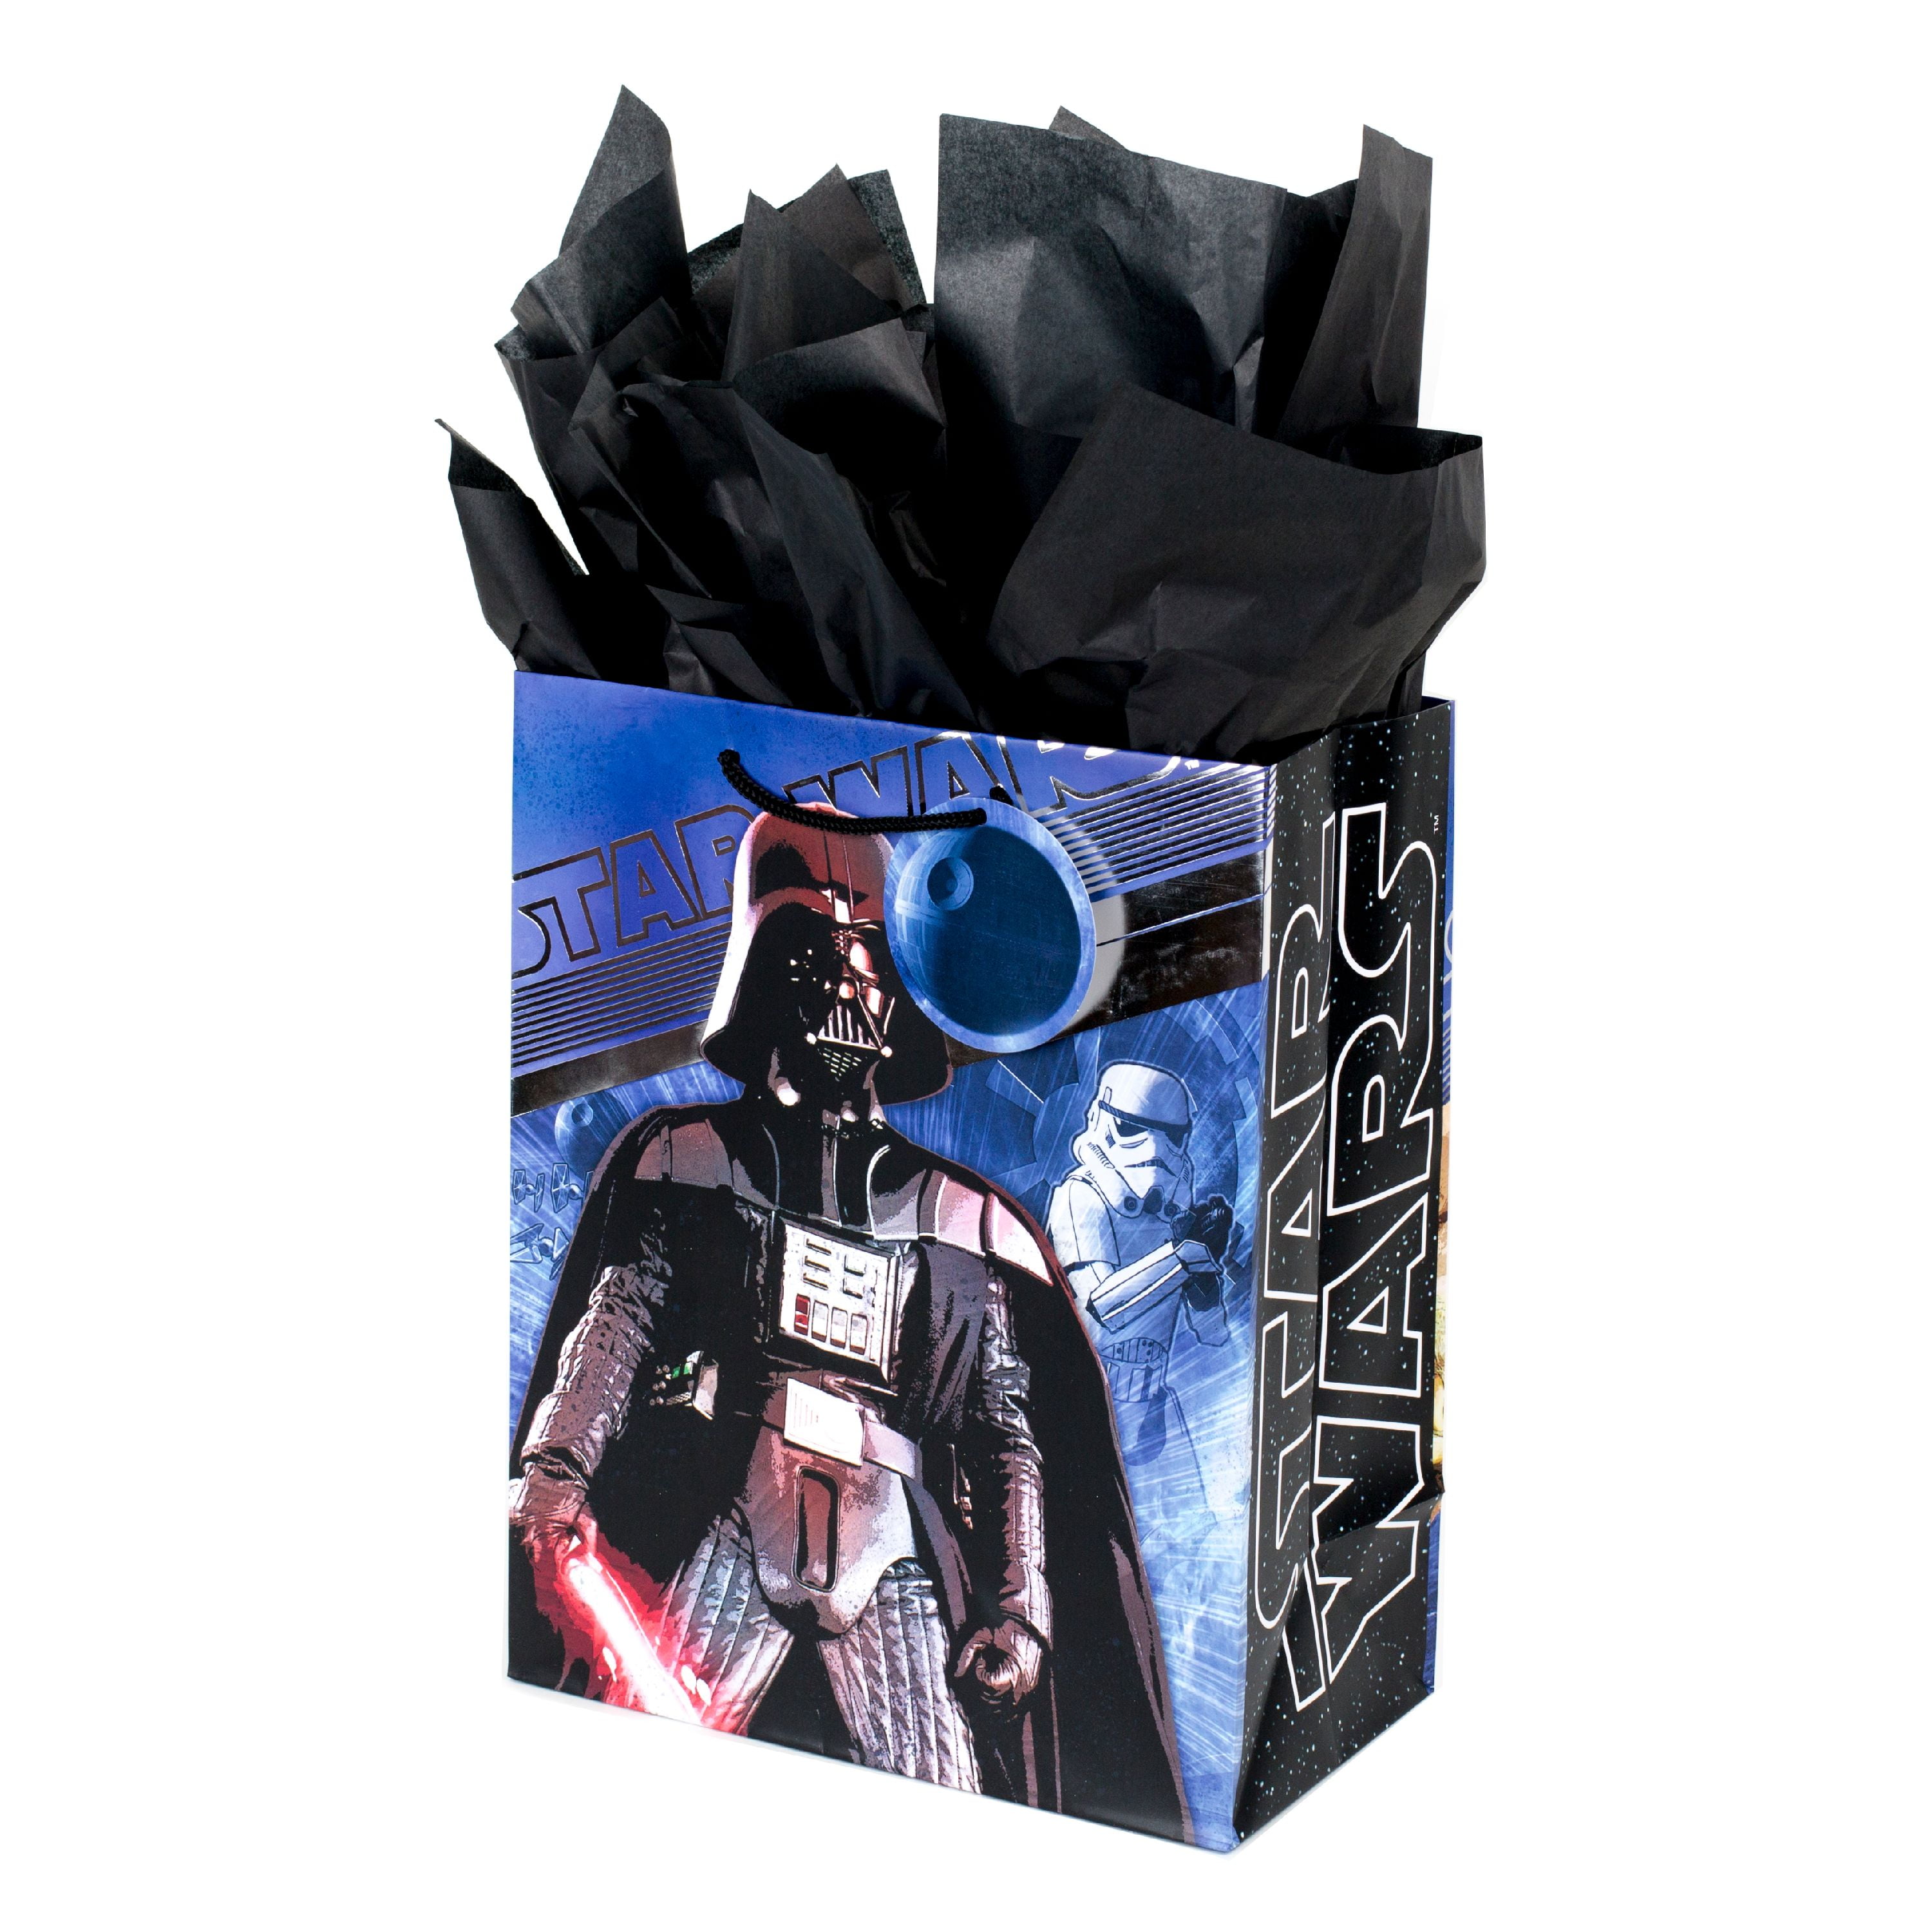 Star Wars 2005 5 Large Gift Bags Hallmark  10-1/2" X 6" X 13"  New Old Stock 5 